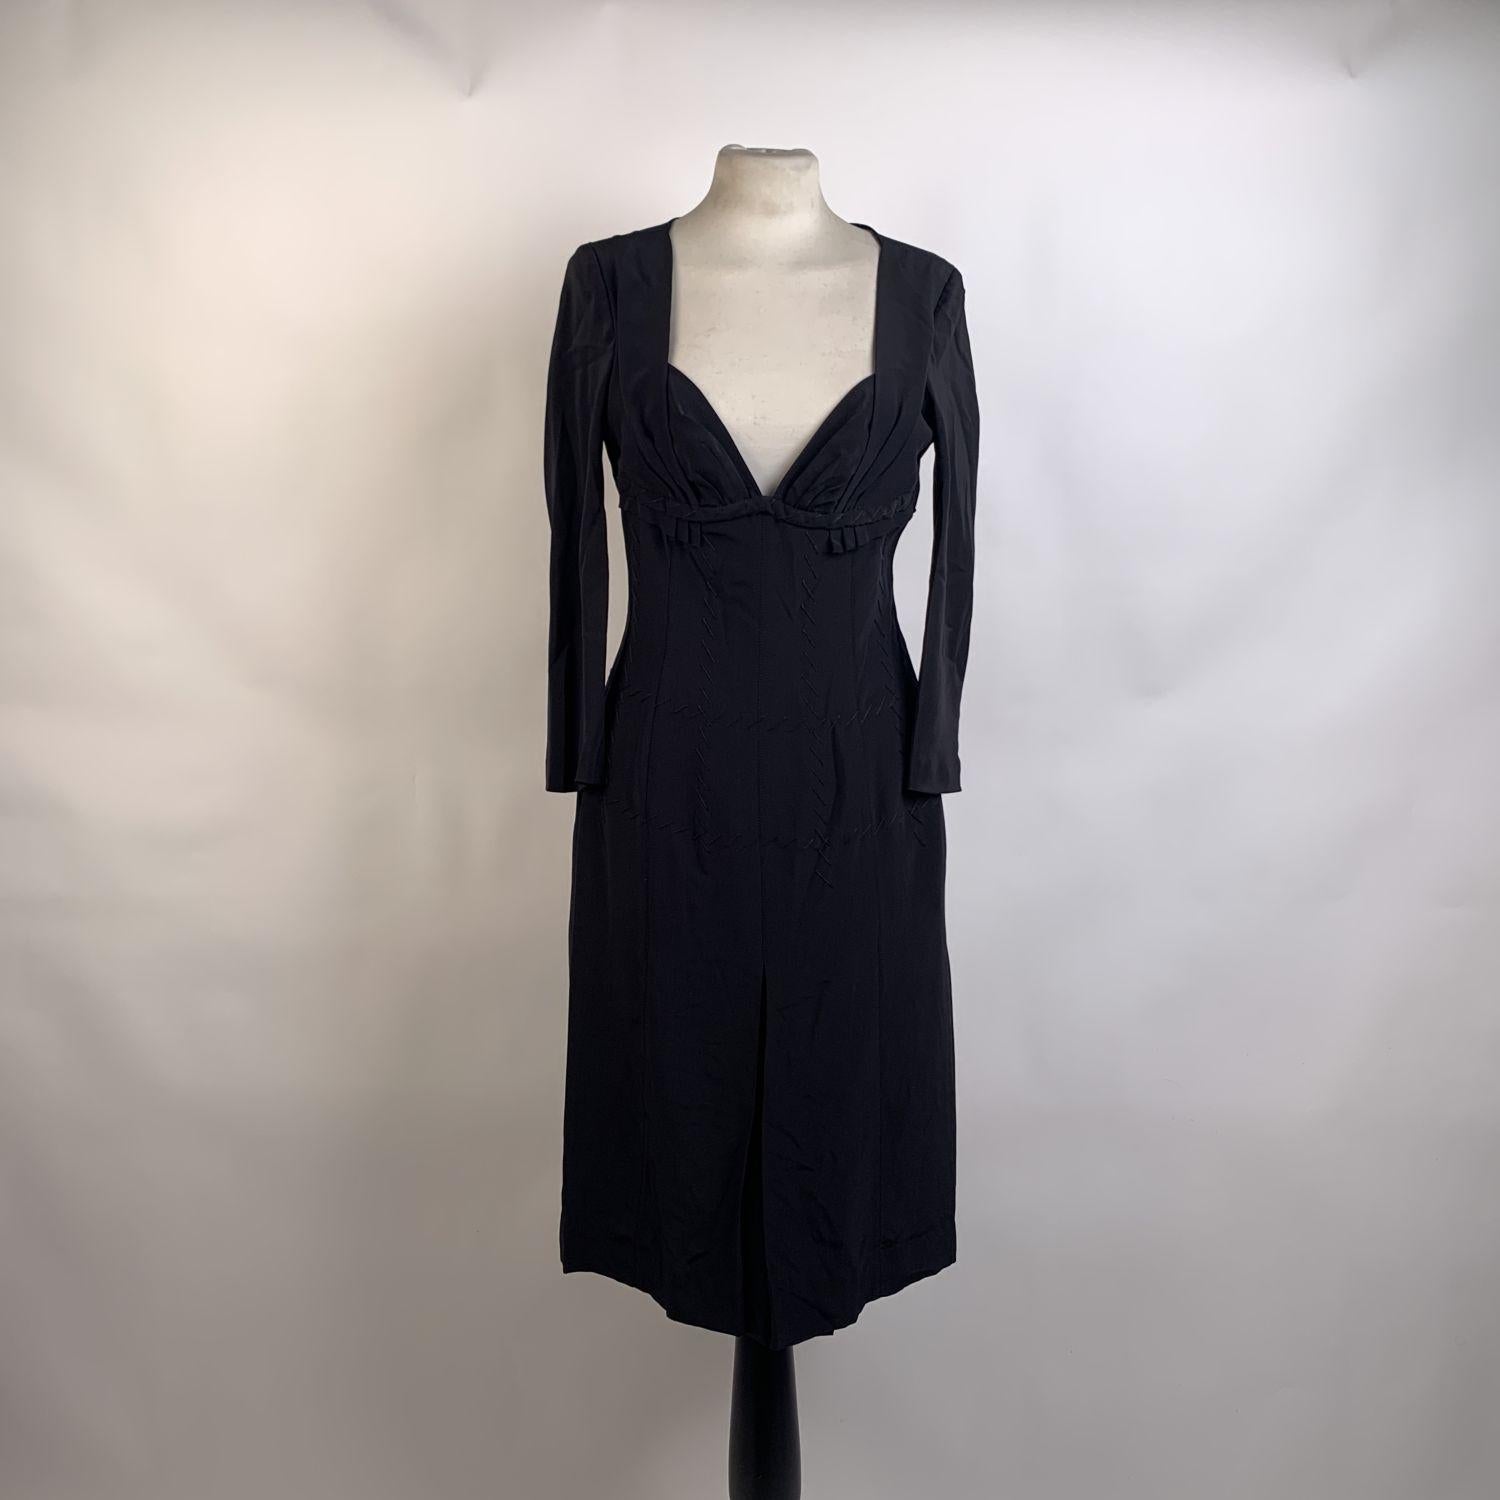 Prada long sleeves sheath dress, crafted in black silk with stitchings detailing. Sweetheart neckline. Rear zip closure. Lined. Composition: 100% Silk. Size: 42 IT (it should correspond to a SMALL size)



Details

MATERIAL: Silk

COLOR: